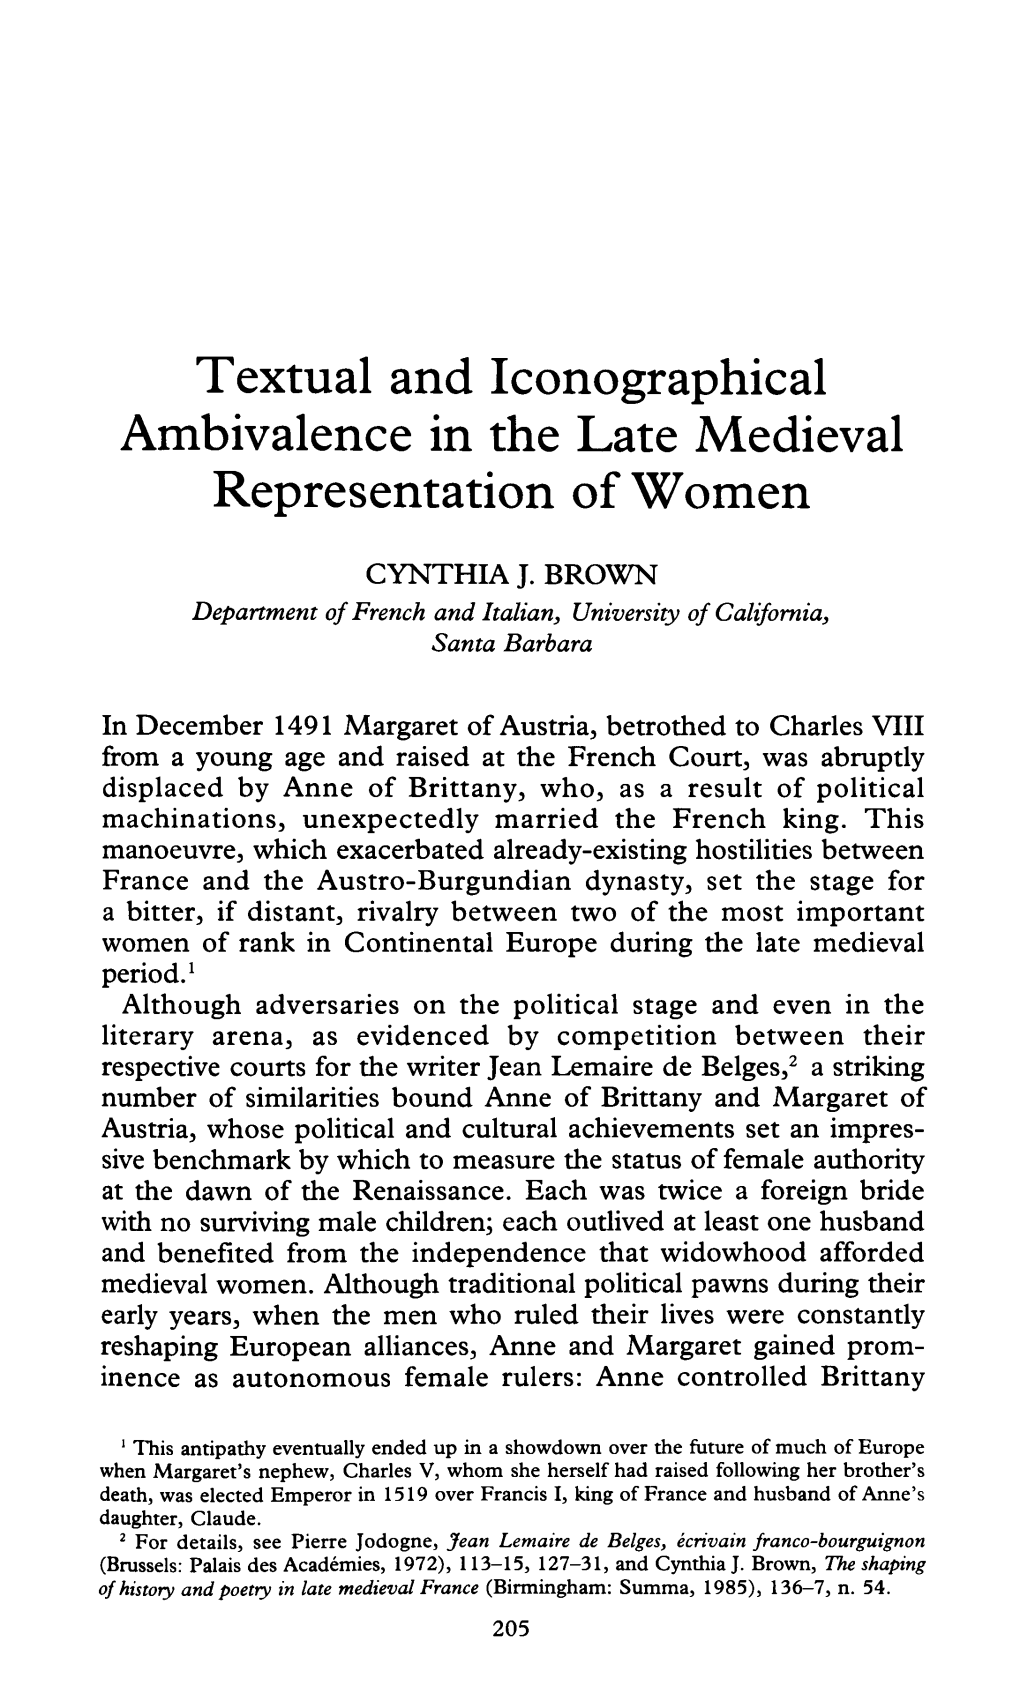 Textual and Iconographical Ambivalence in the Late Medieval Representation of Women